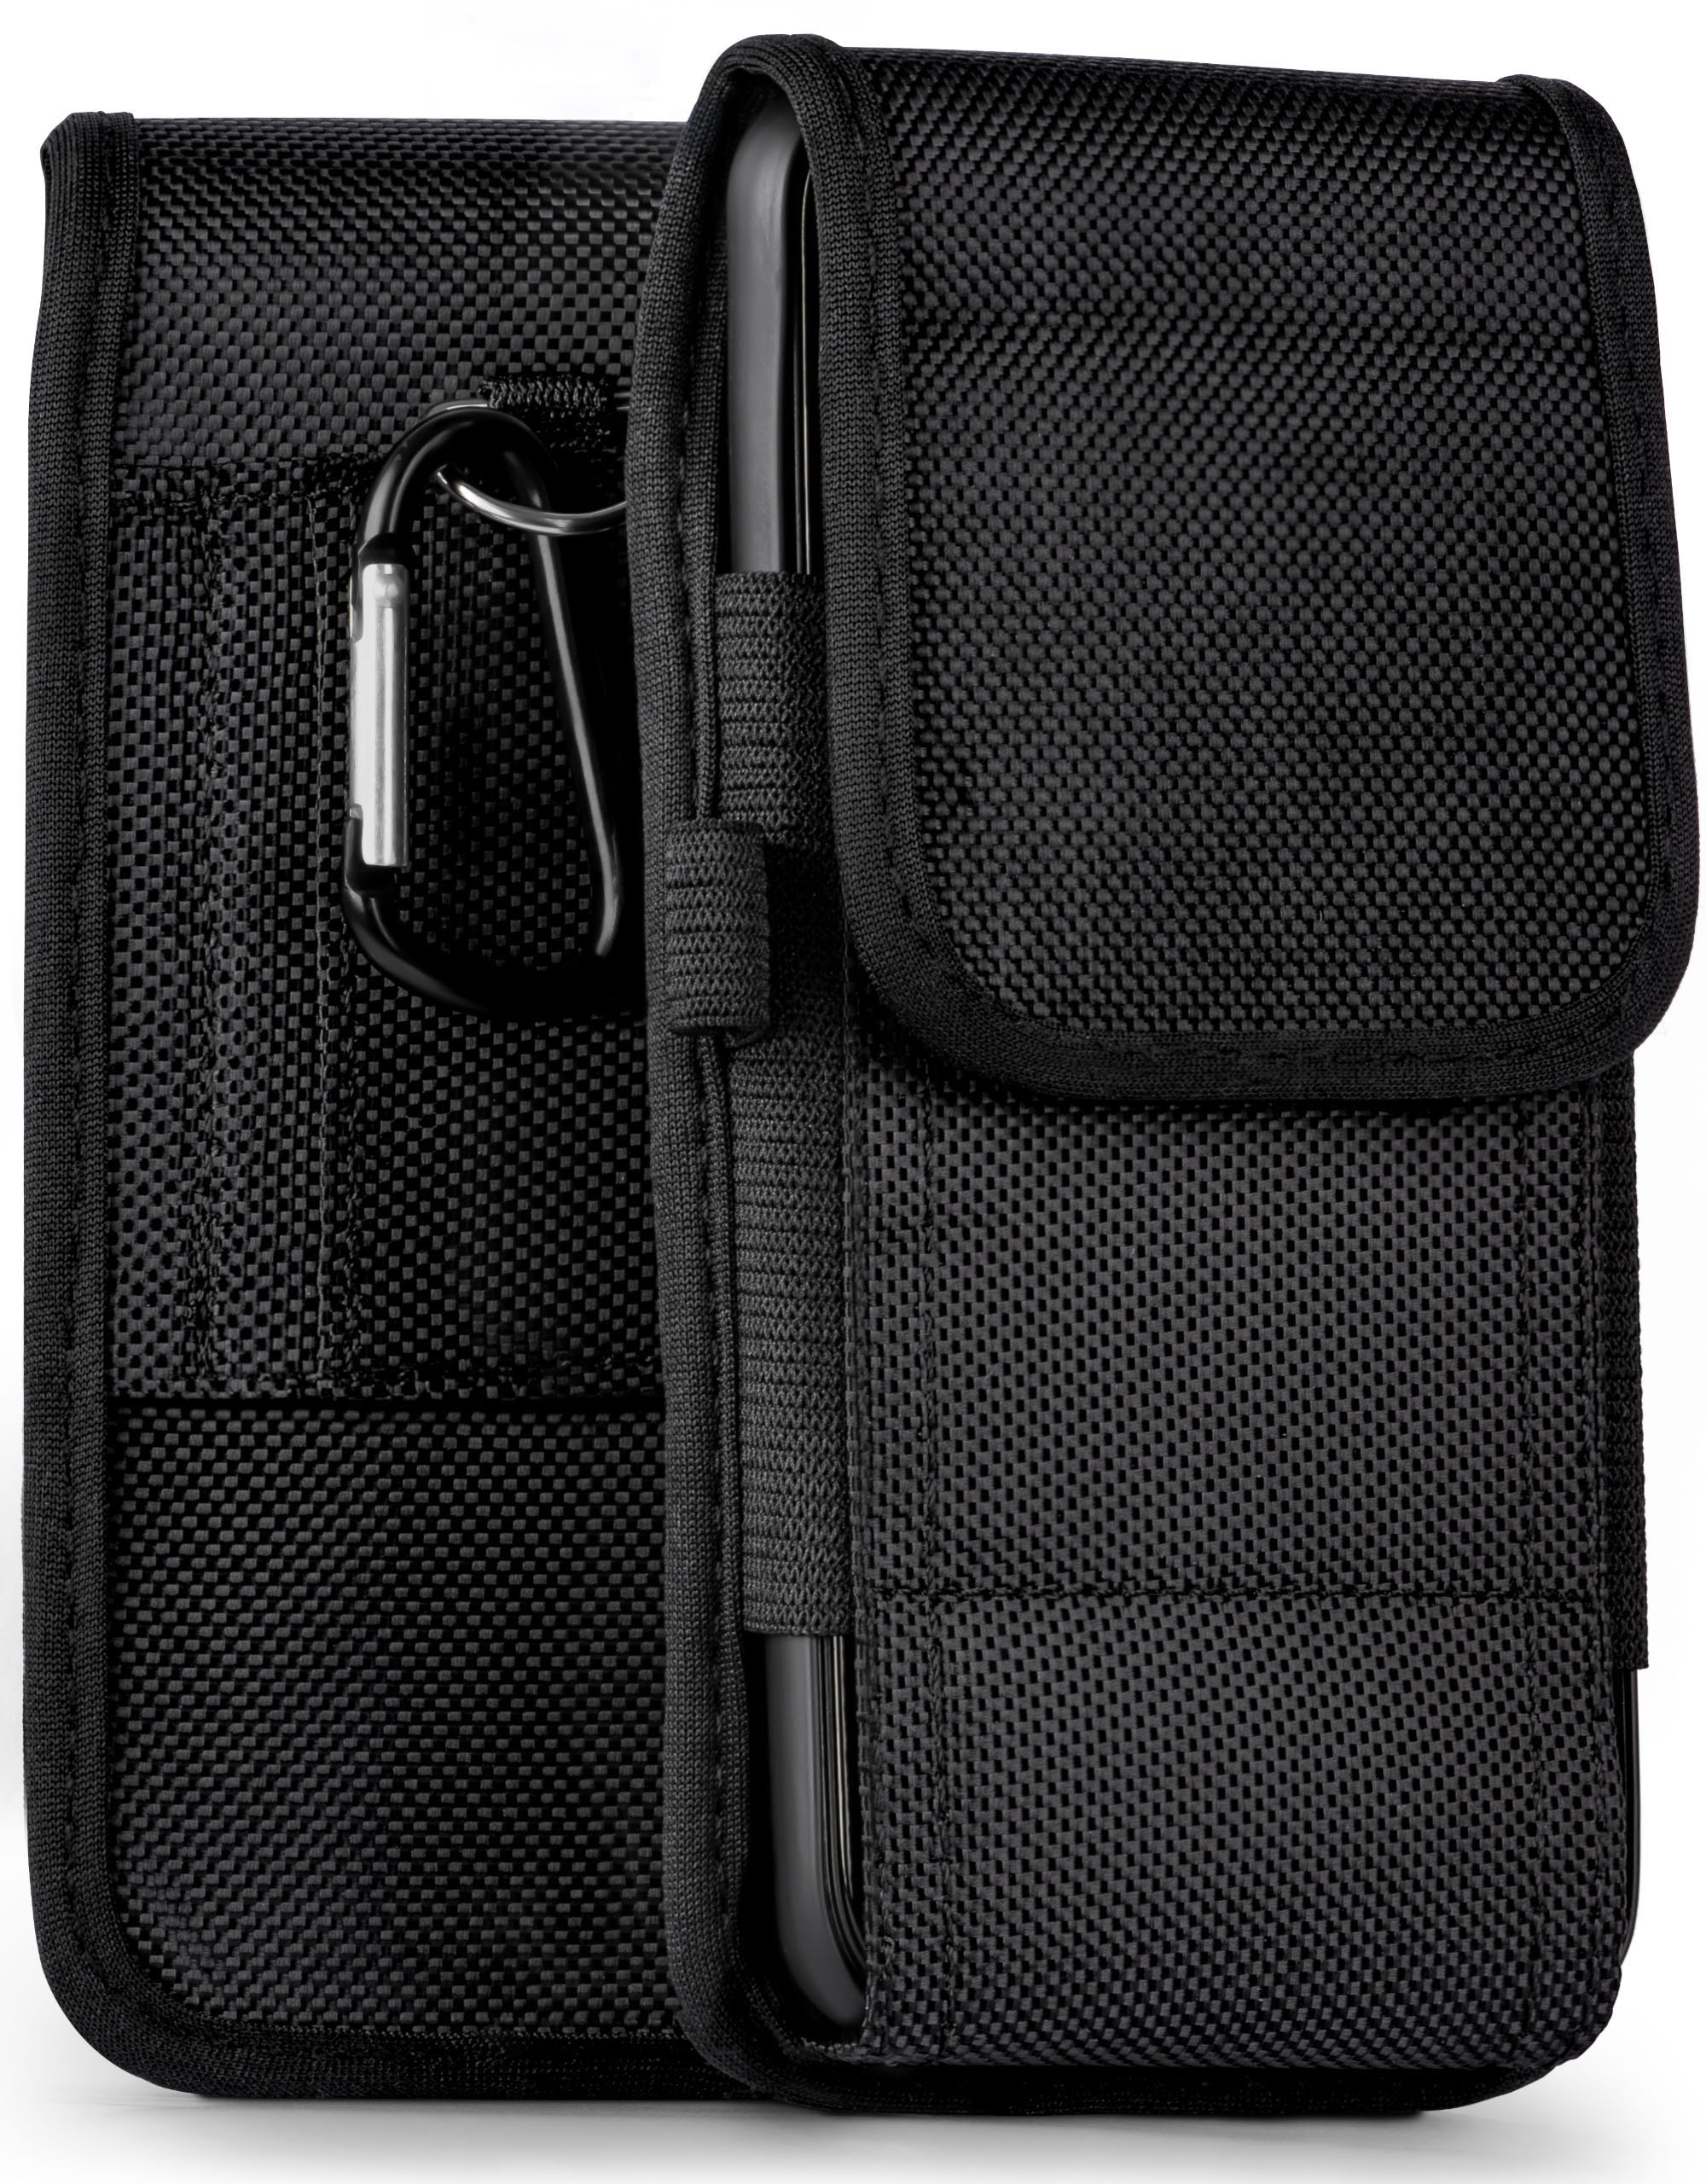 Holster, MOEX Case, Note Hafury, Trail 10, Agility